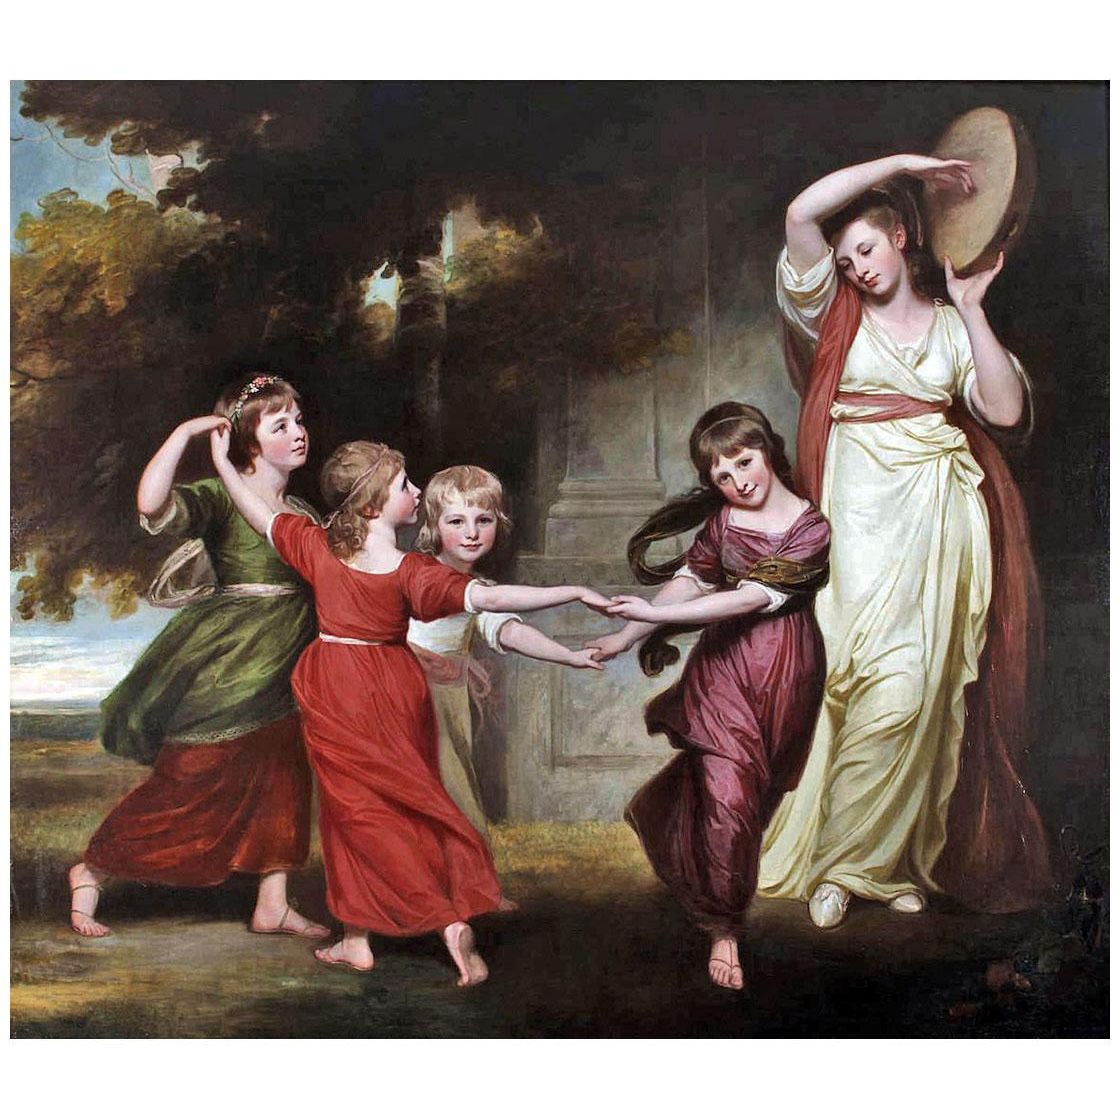 George Romney. The Children of Granville Leveson-Gower. 1776-1777